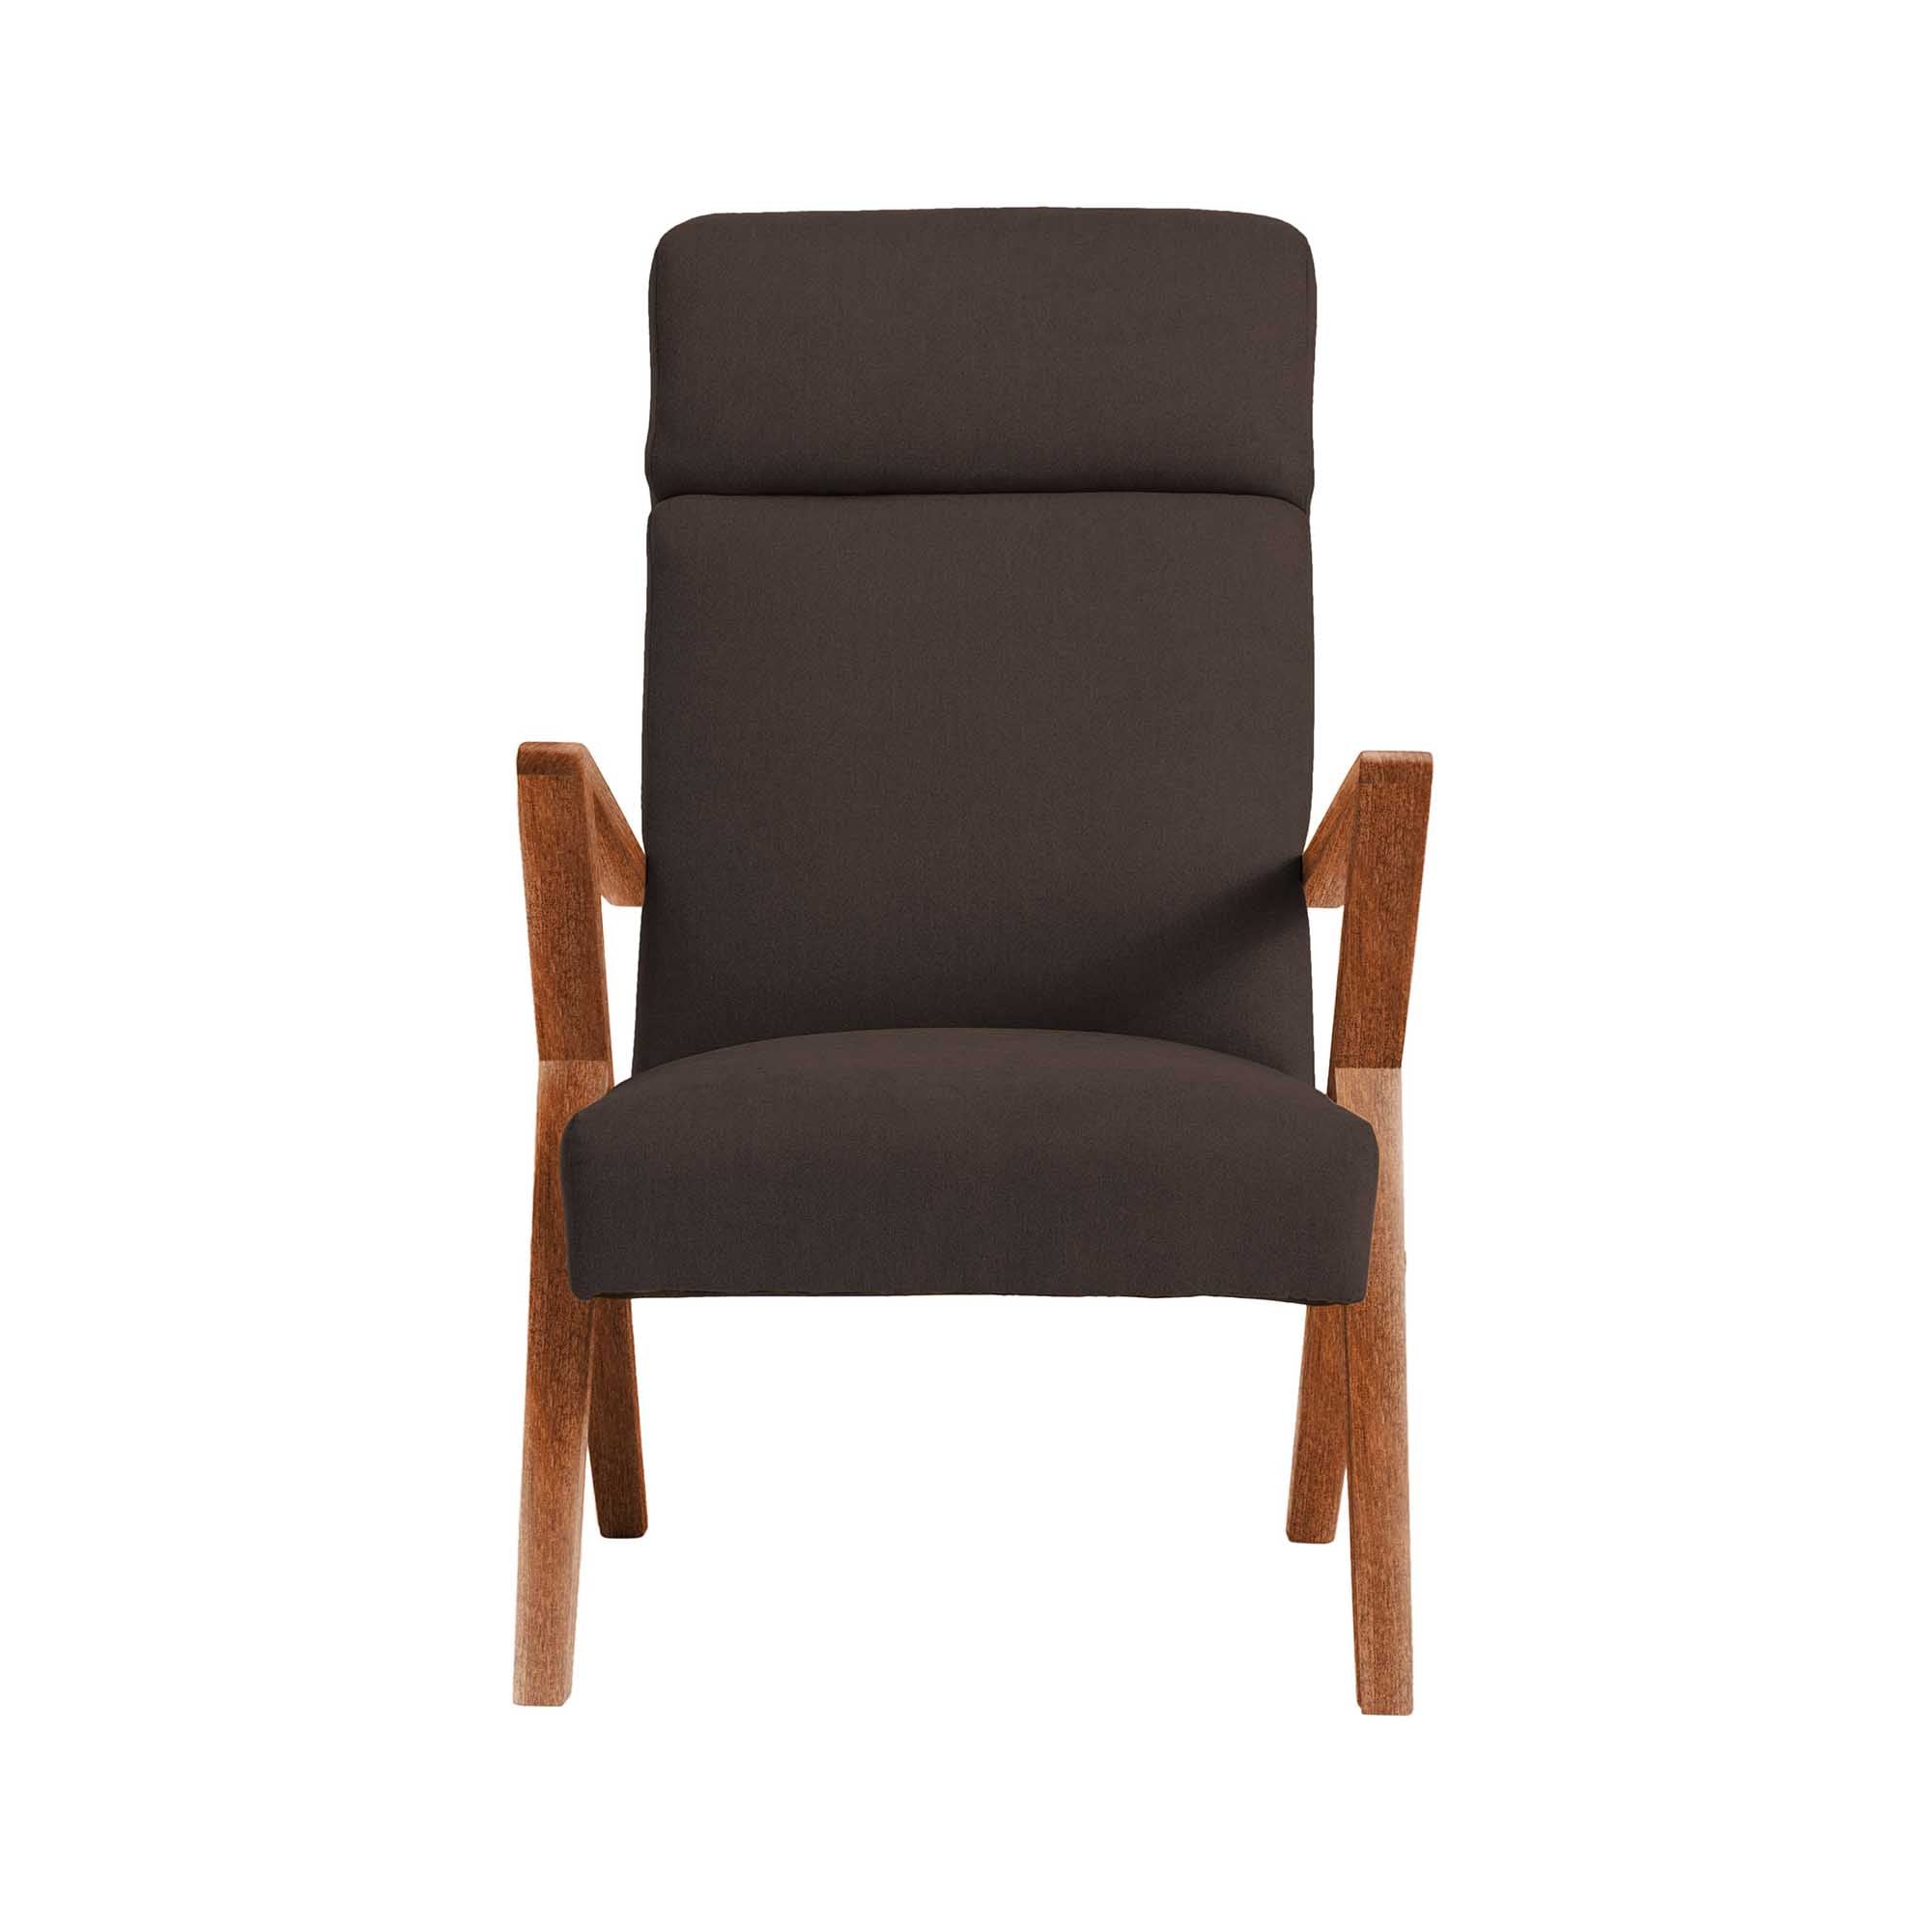 Lounge Chair, Beech Wood Frame, Walnut Colour brown fabric, front view